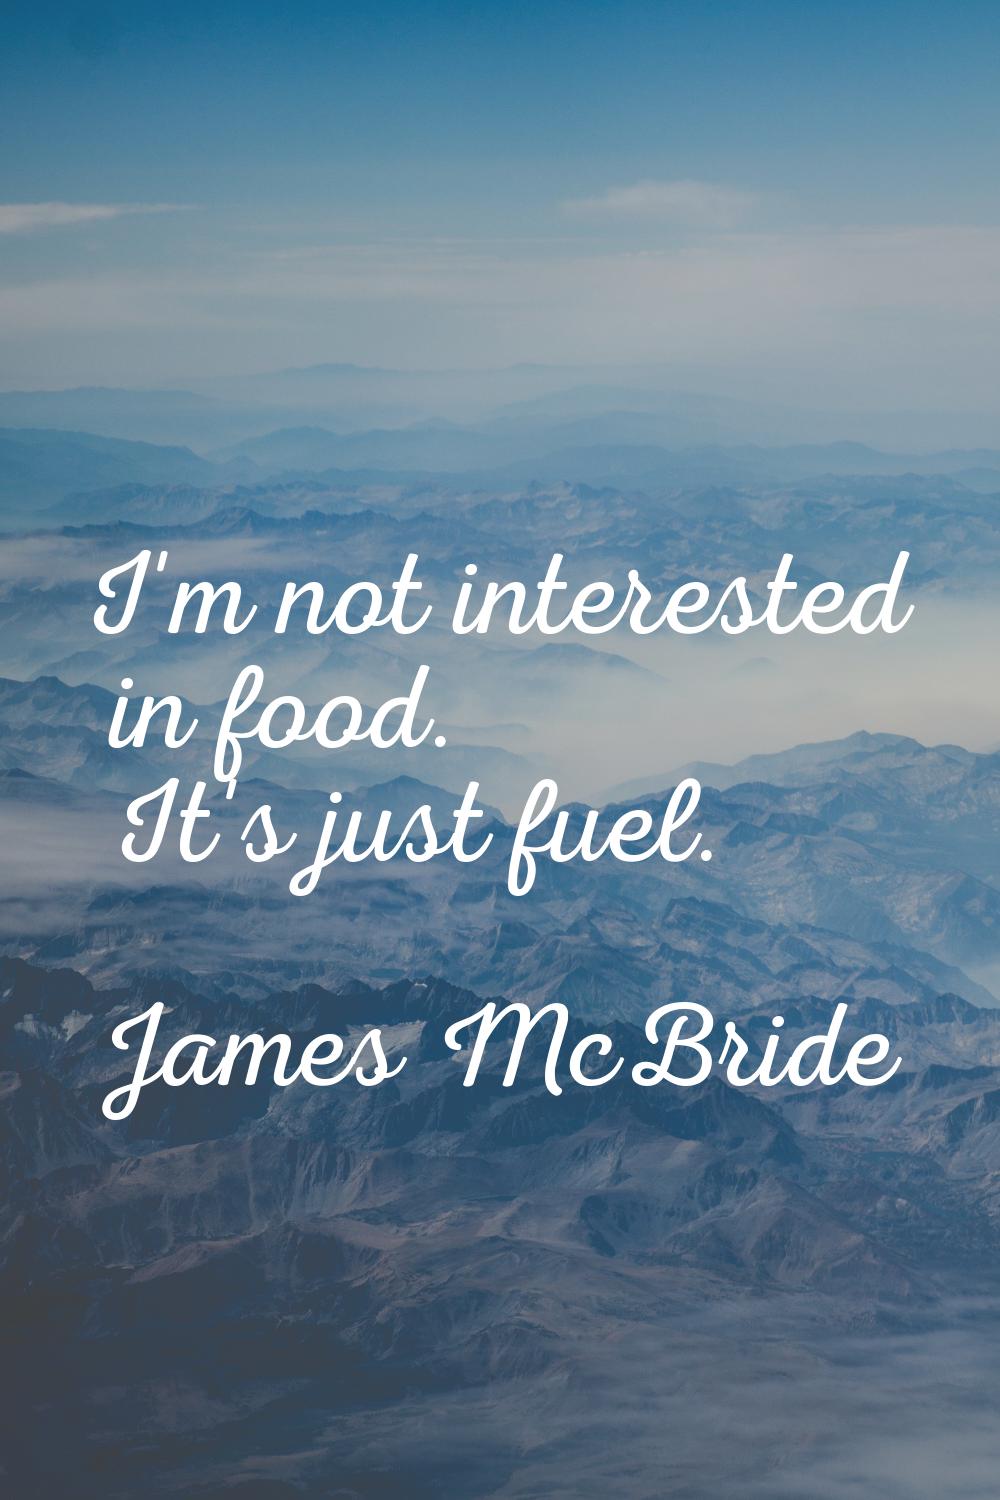 I'm not interested in food. It's just fuel.